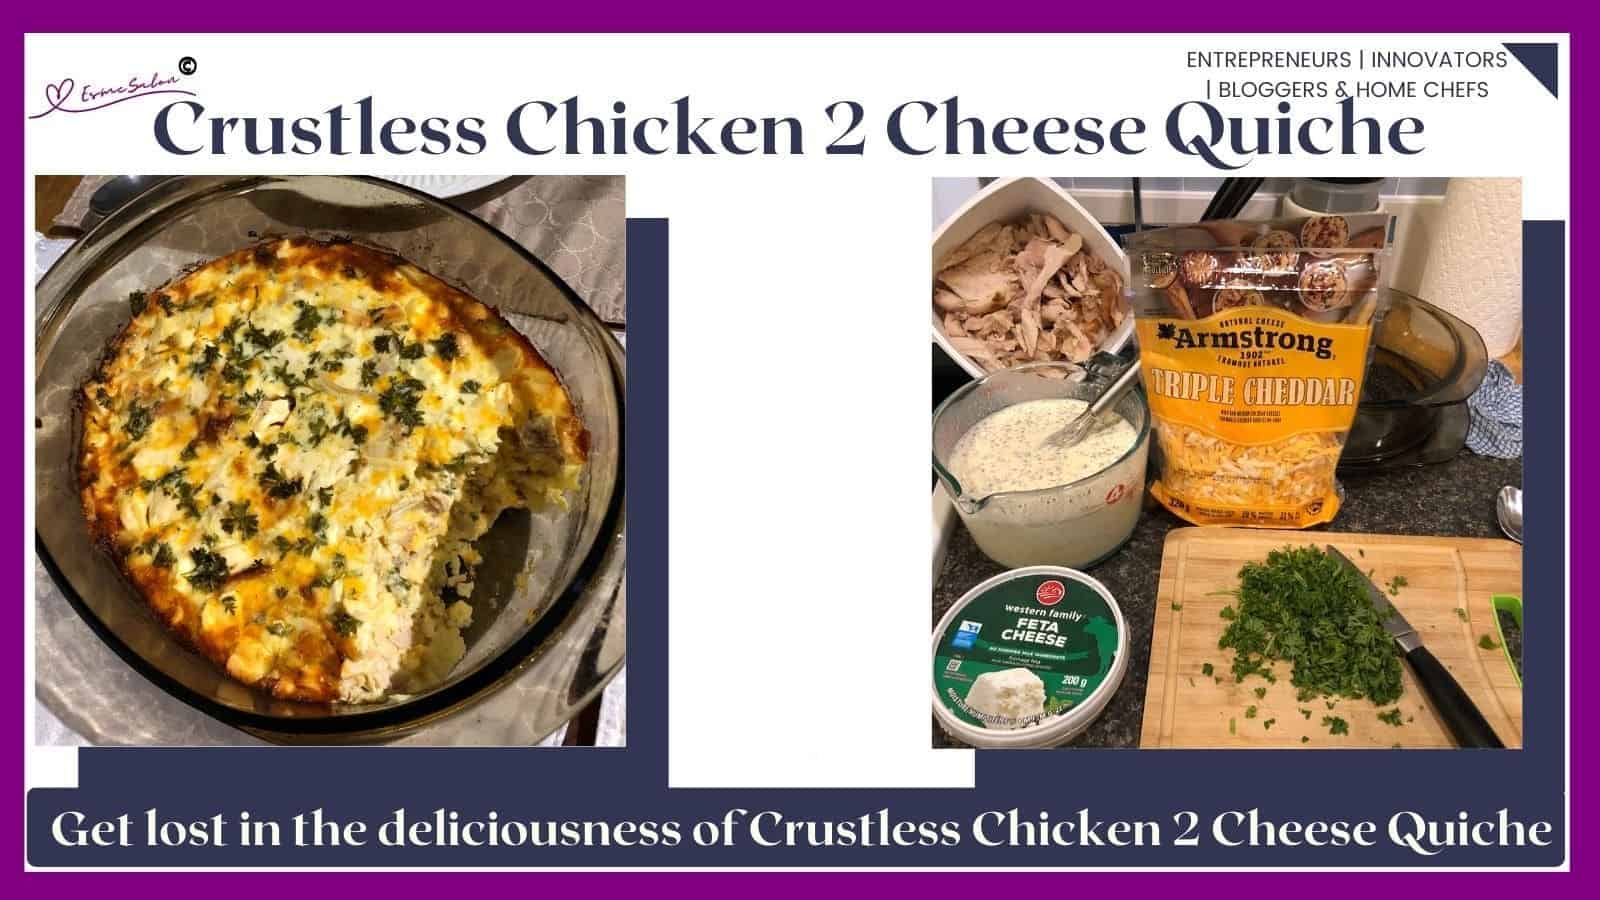 an image of a Crustless Chicken 2 Cheese Quiche in a brown casserole dish